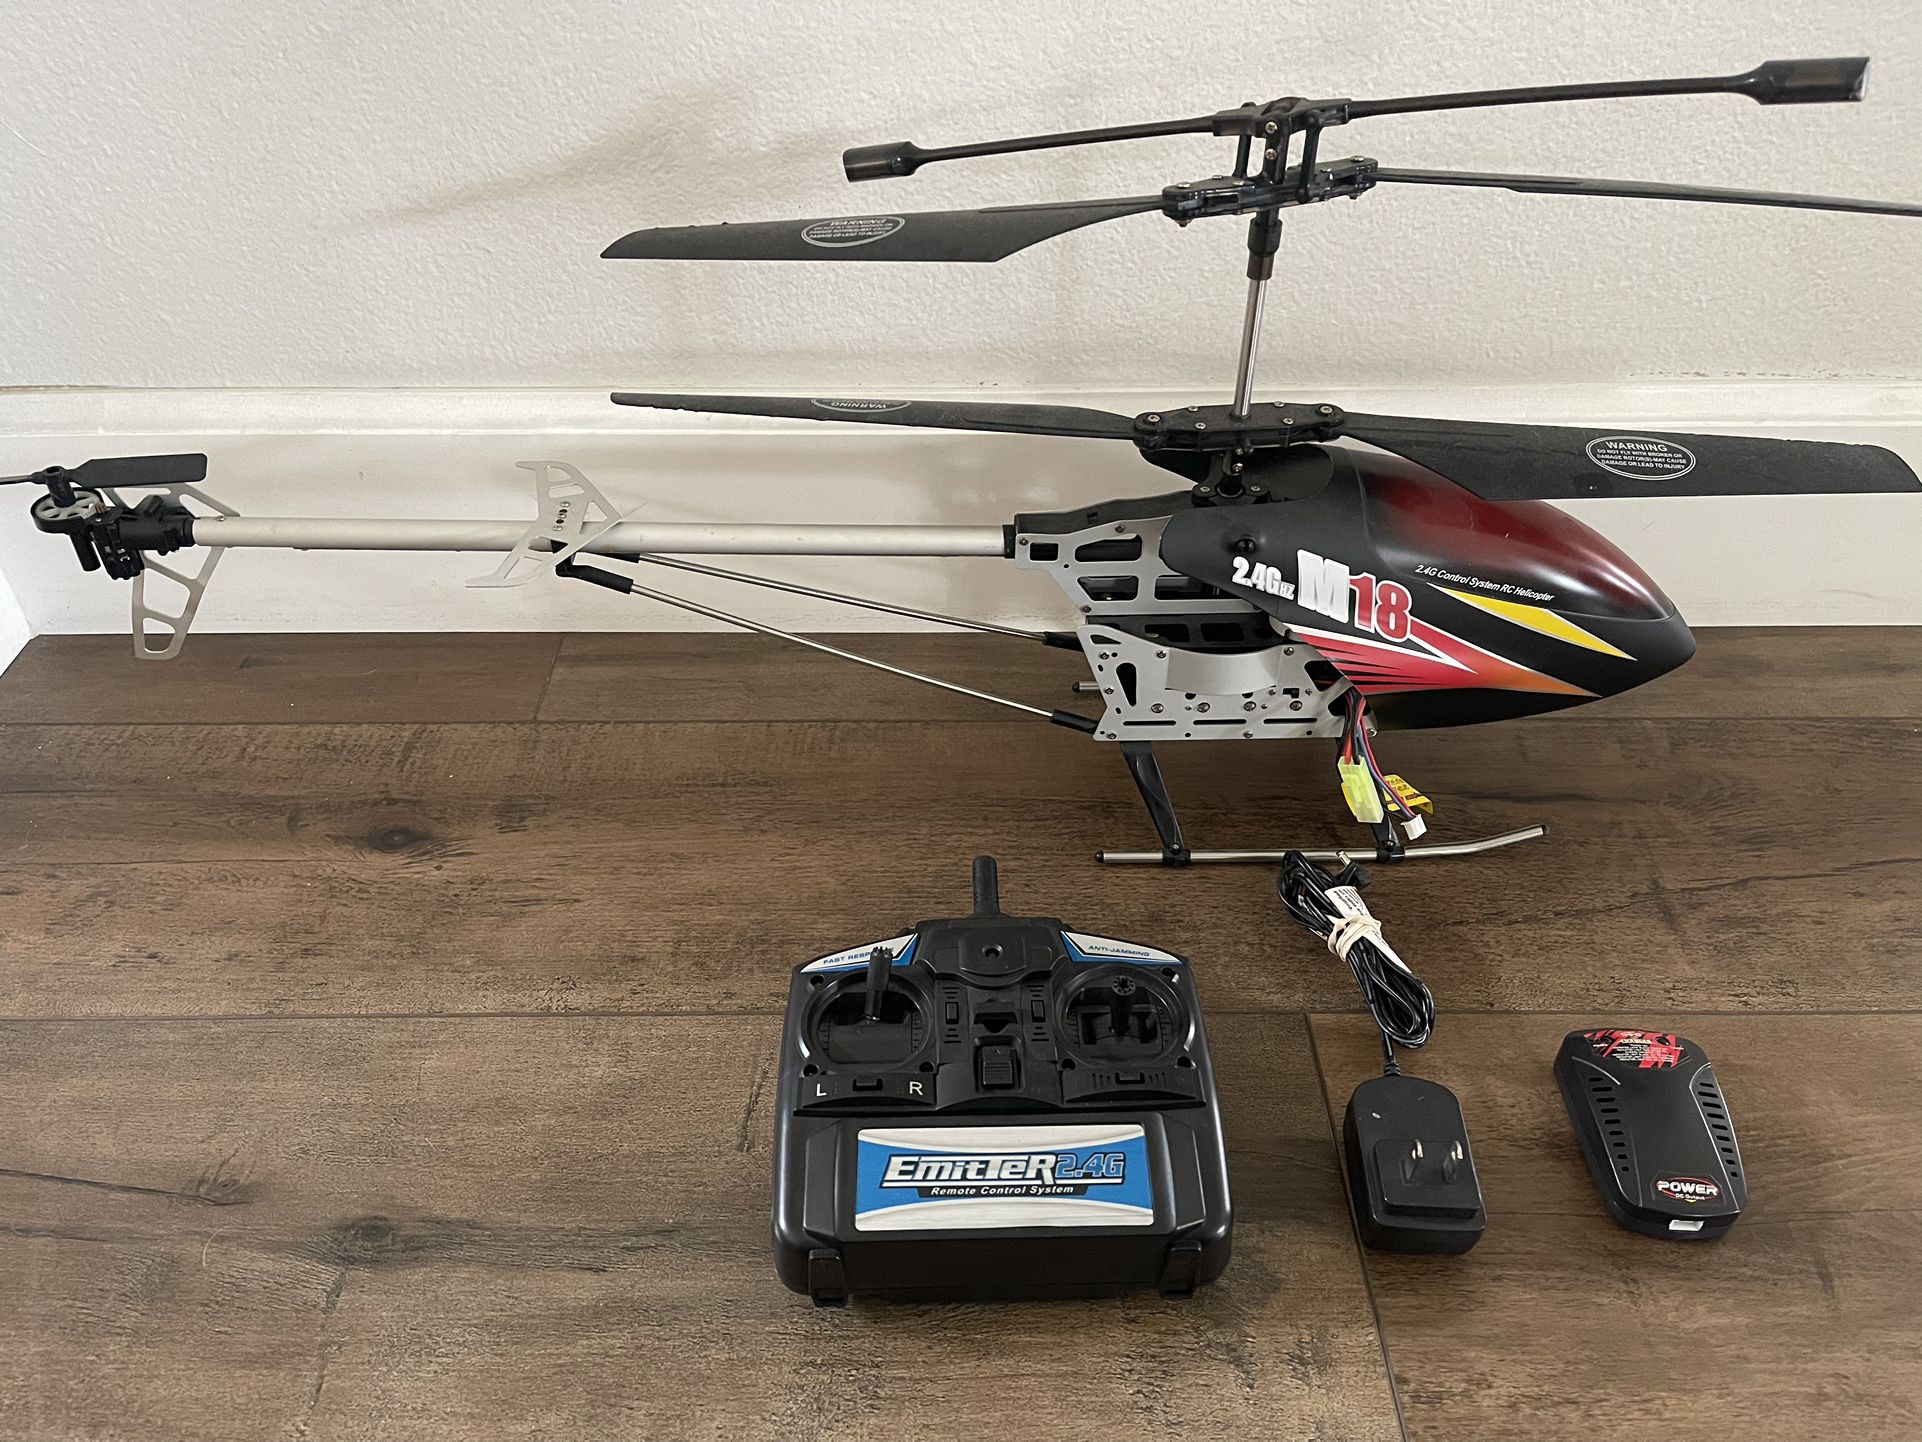 M18 RC Helicopter 